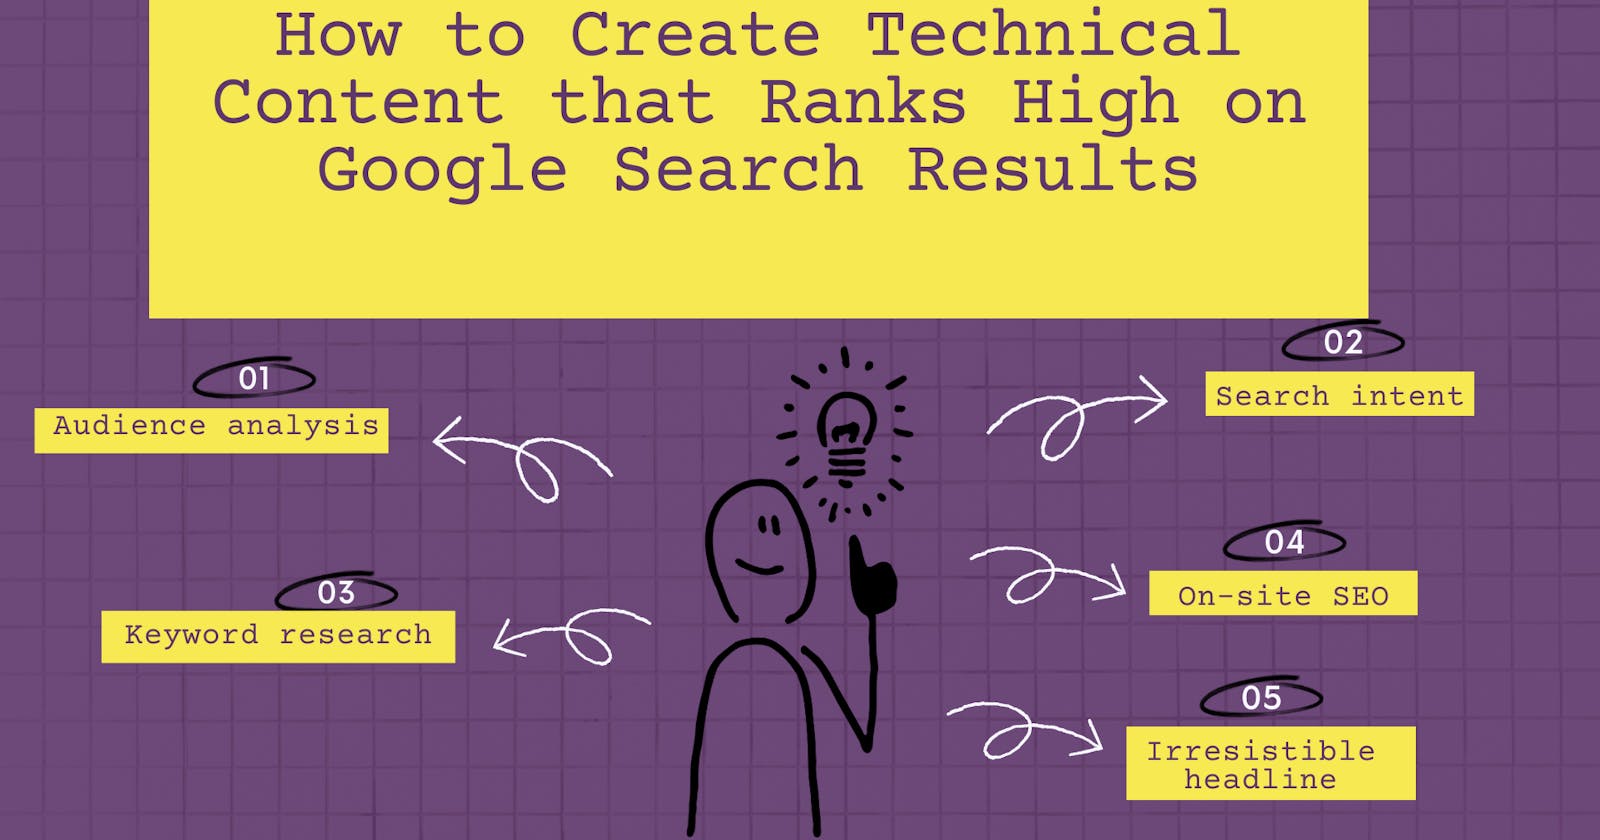 How to Create Technical Content that Ranks High on Google Search Results